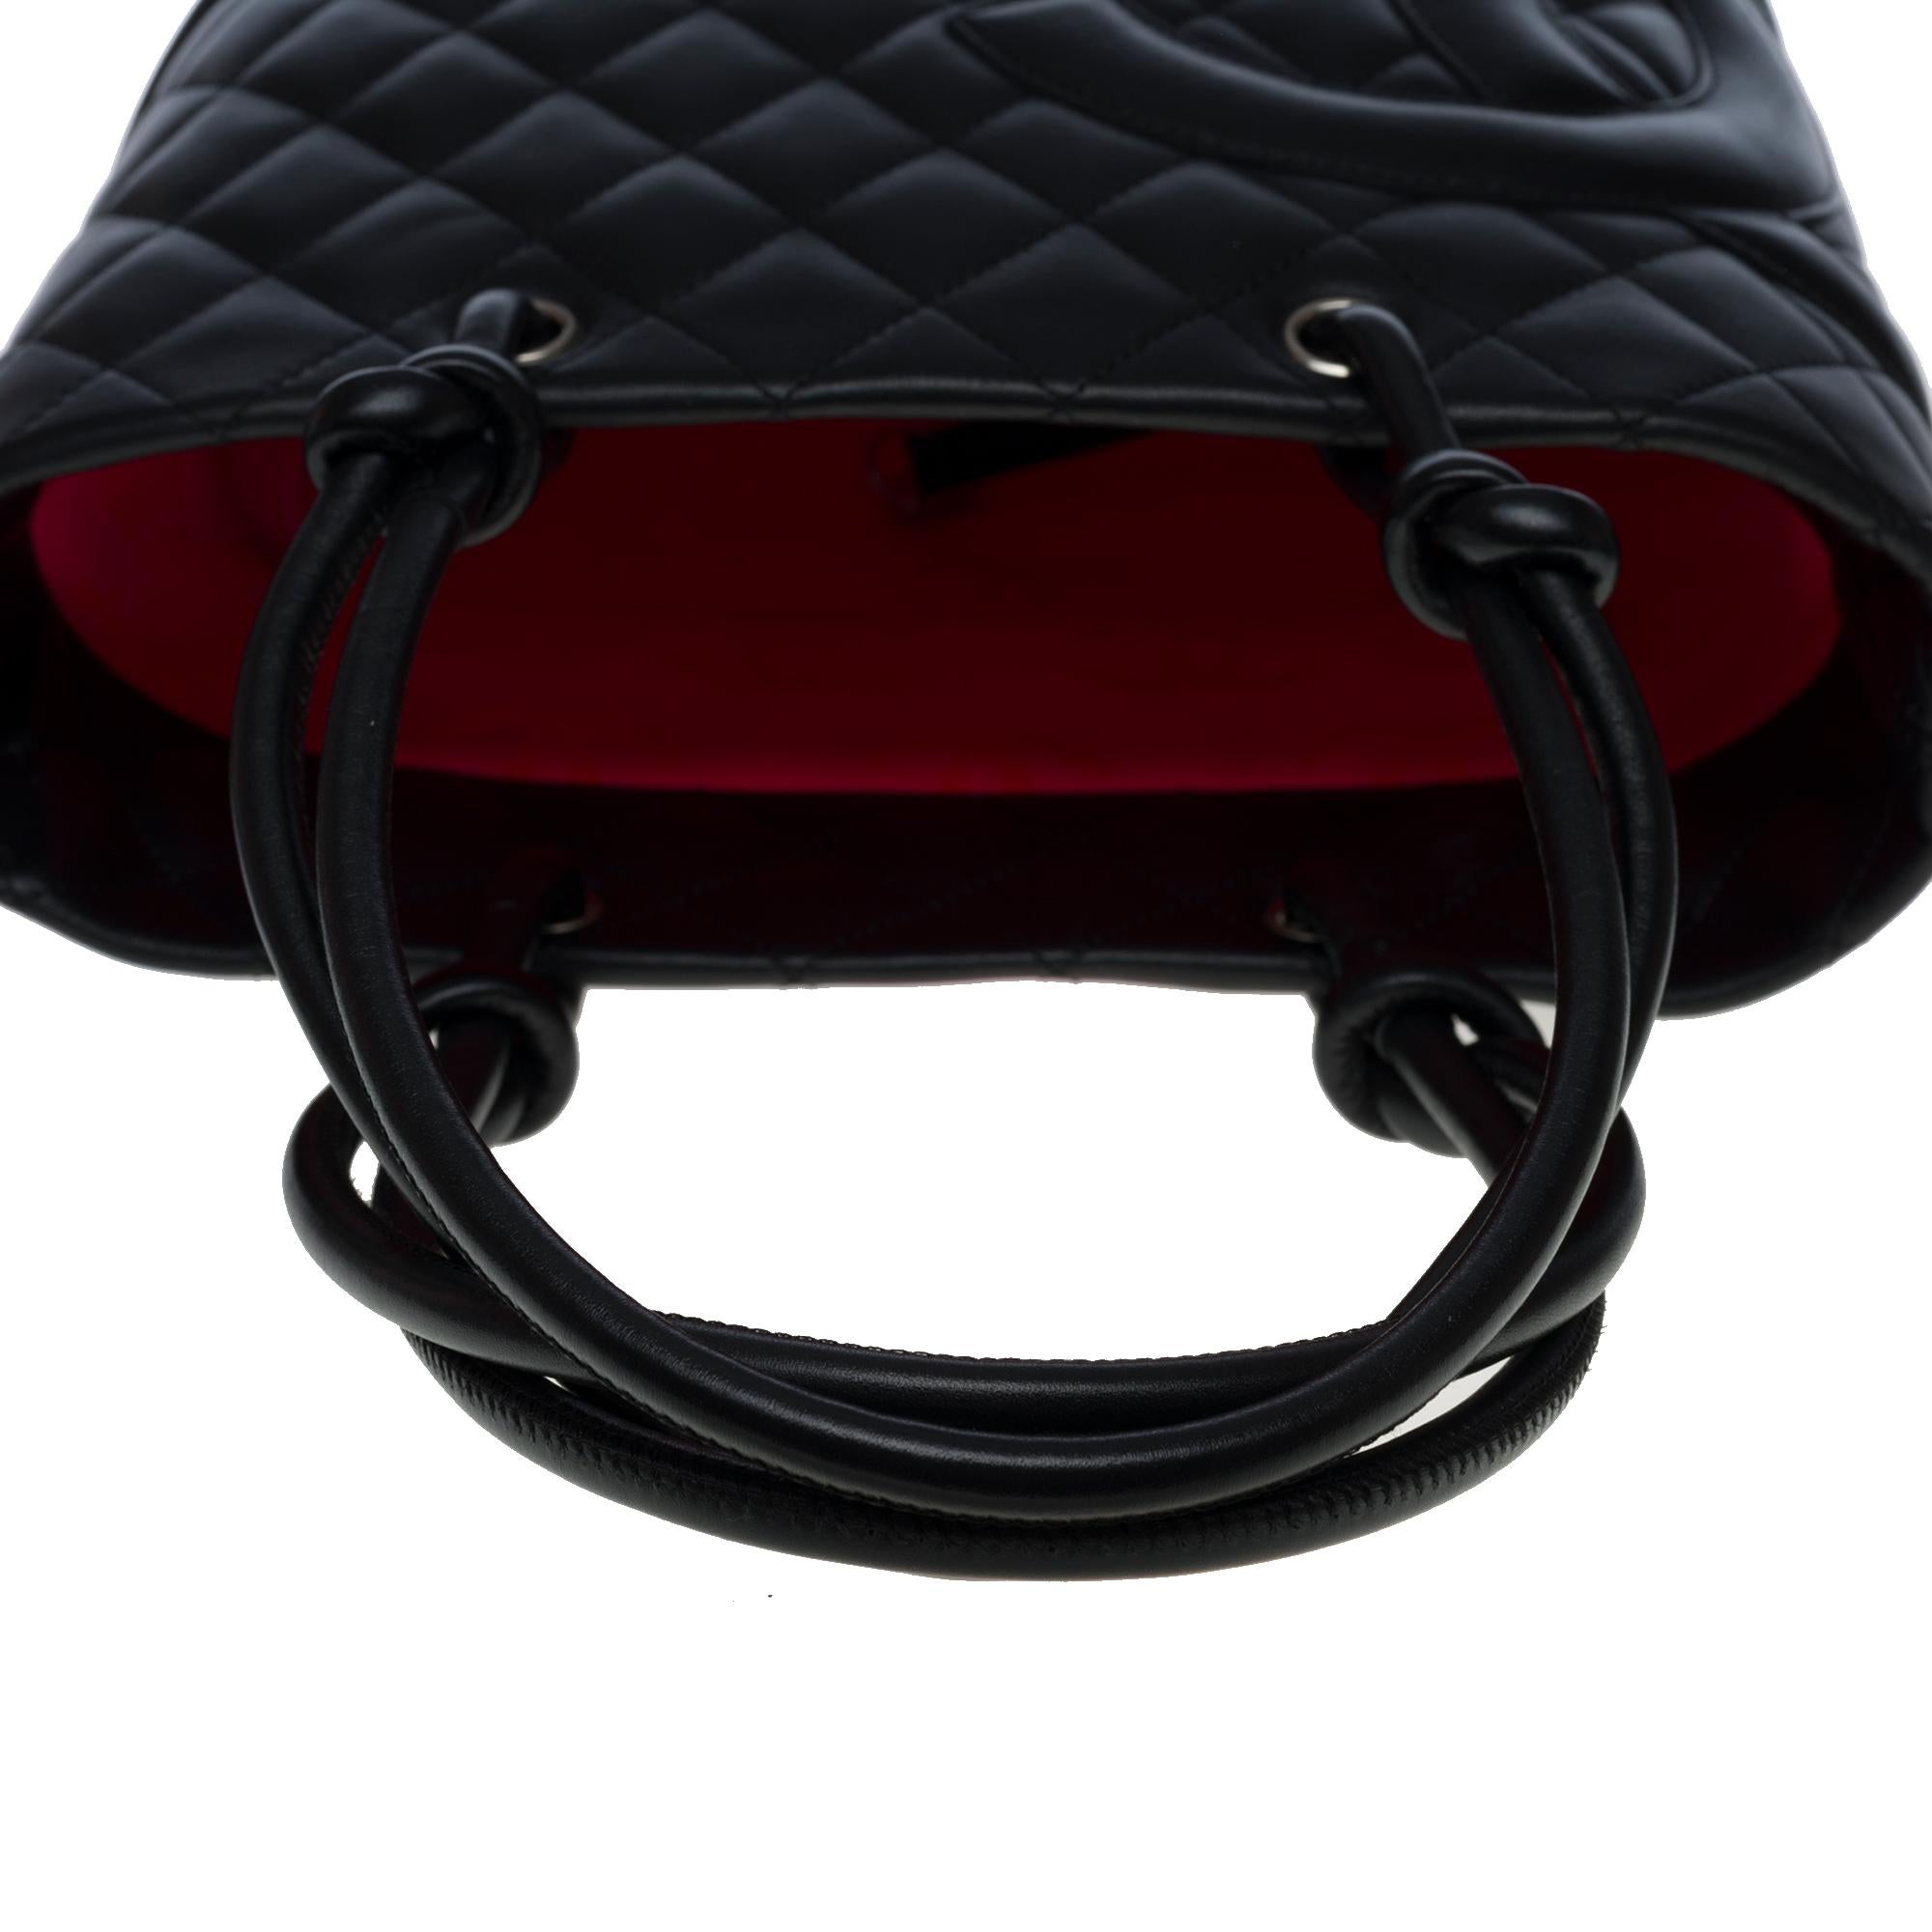 Gorgeous Chanel Cambon Tote bag in black quilted lambskin, SHW 1